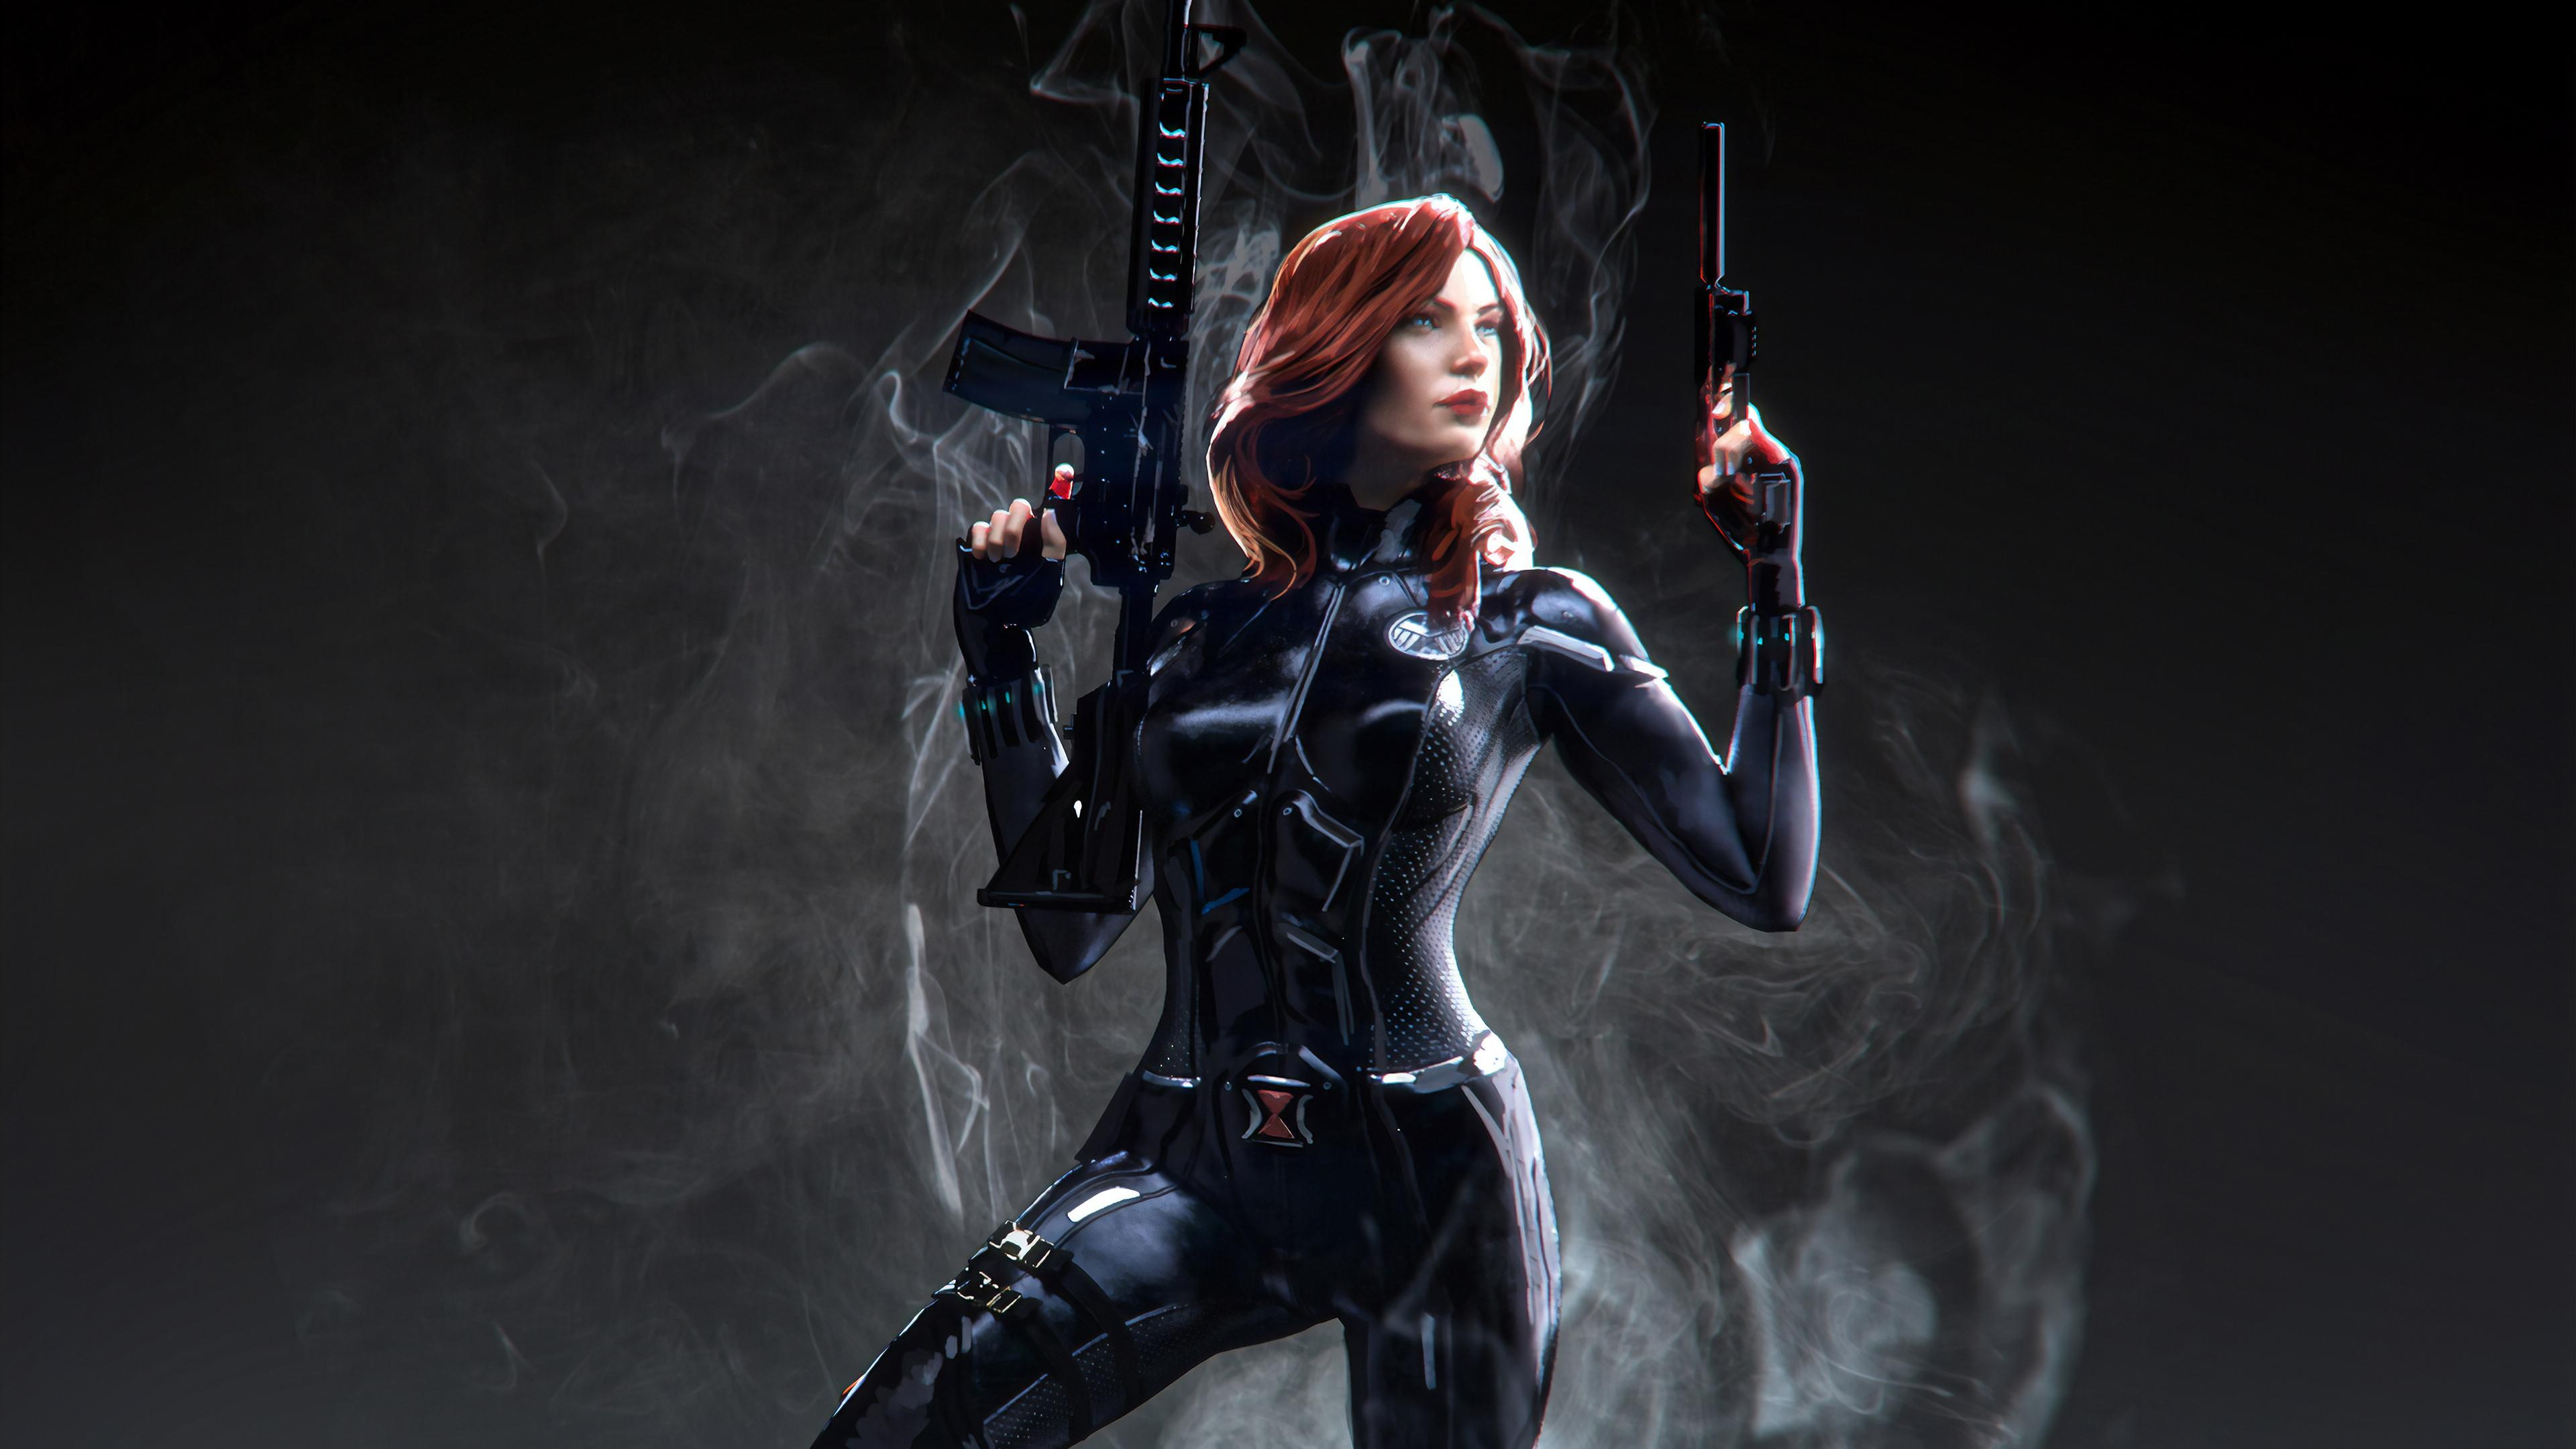 3840 x 2160 · jpeg - Seriously! 19+ Facts Of Wallpaper Black Widow They Forgot to Let You in ...